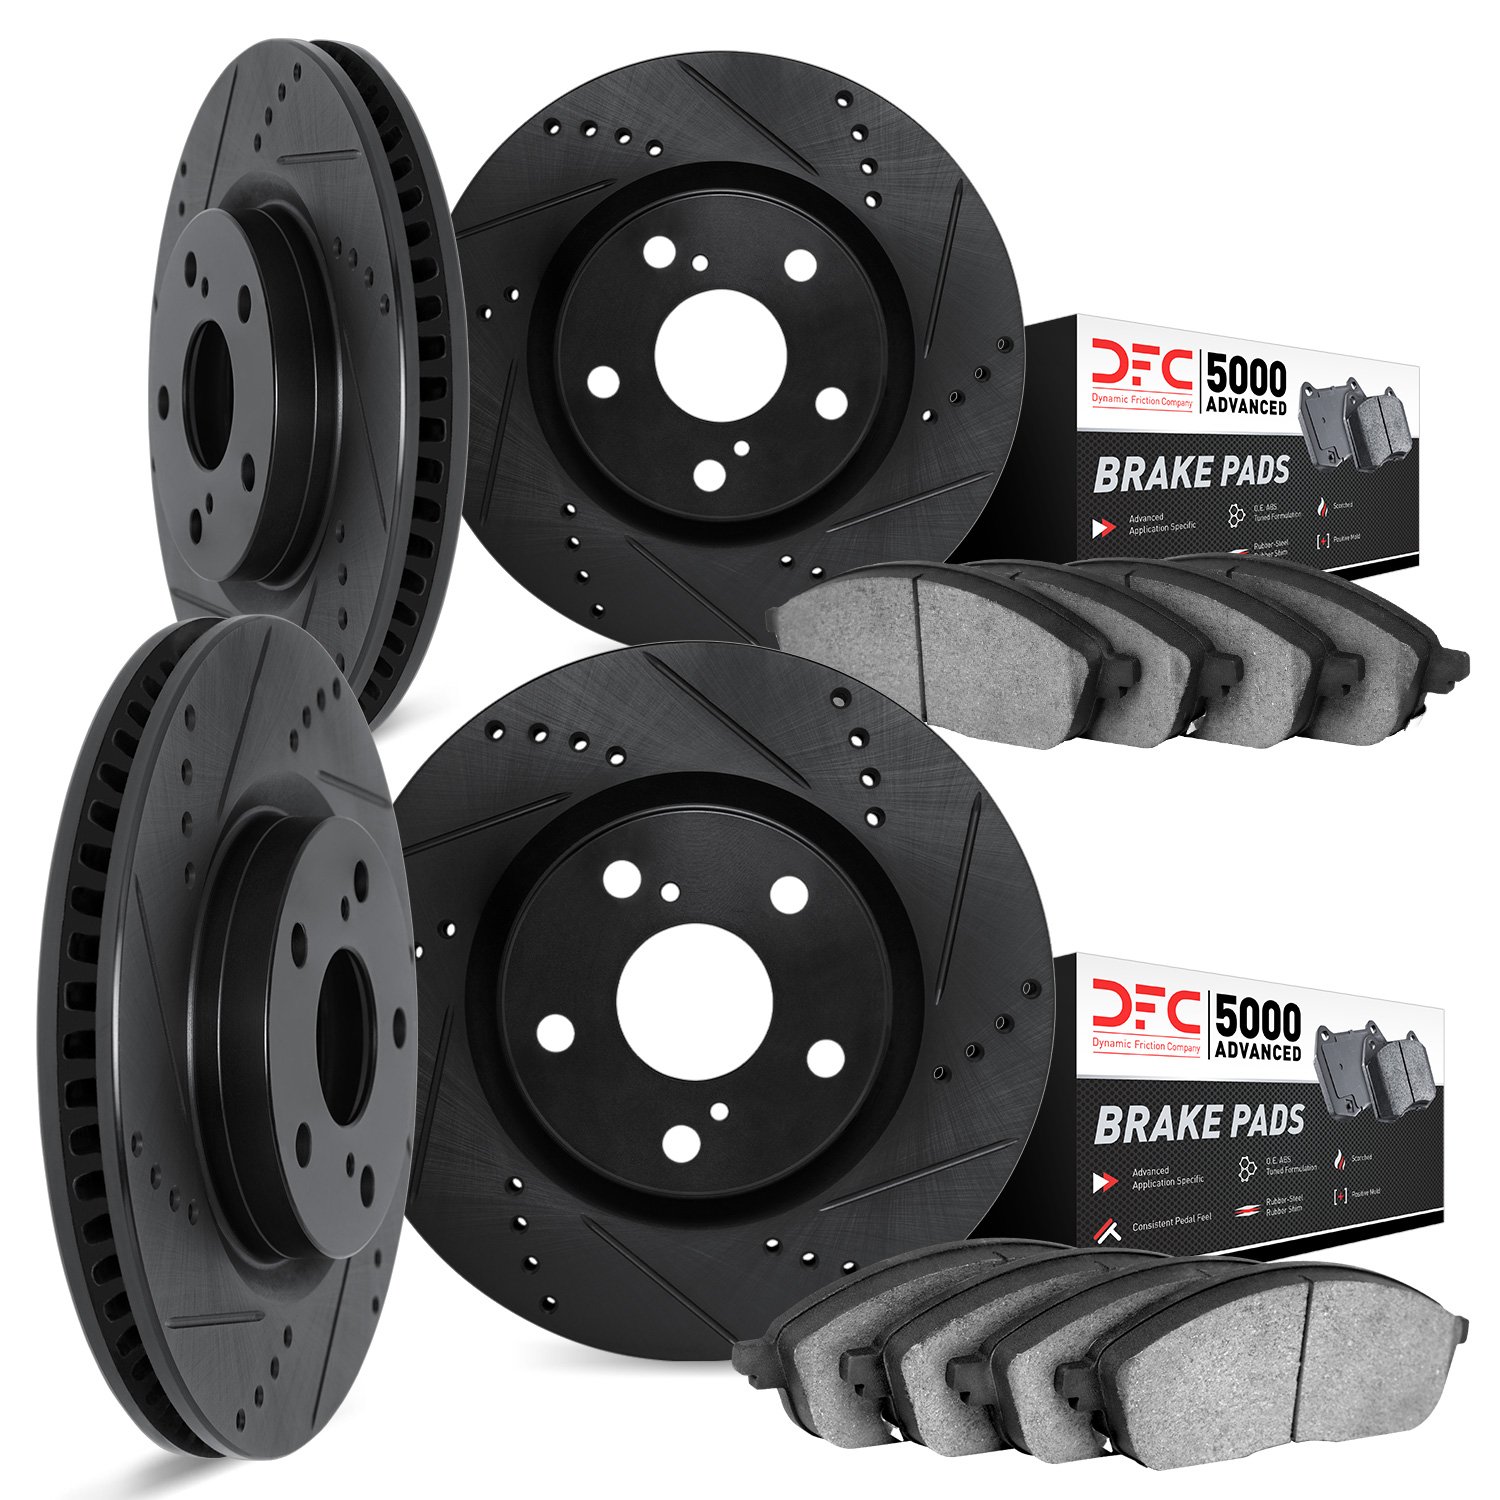 8504-13015 Drilled/Slotted Brake Rotors w/5000 Advanced Brake Pads Kit [Black], 2015-2015 Subaru, Position: Front and Rear